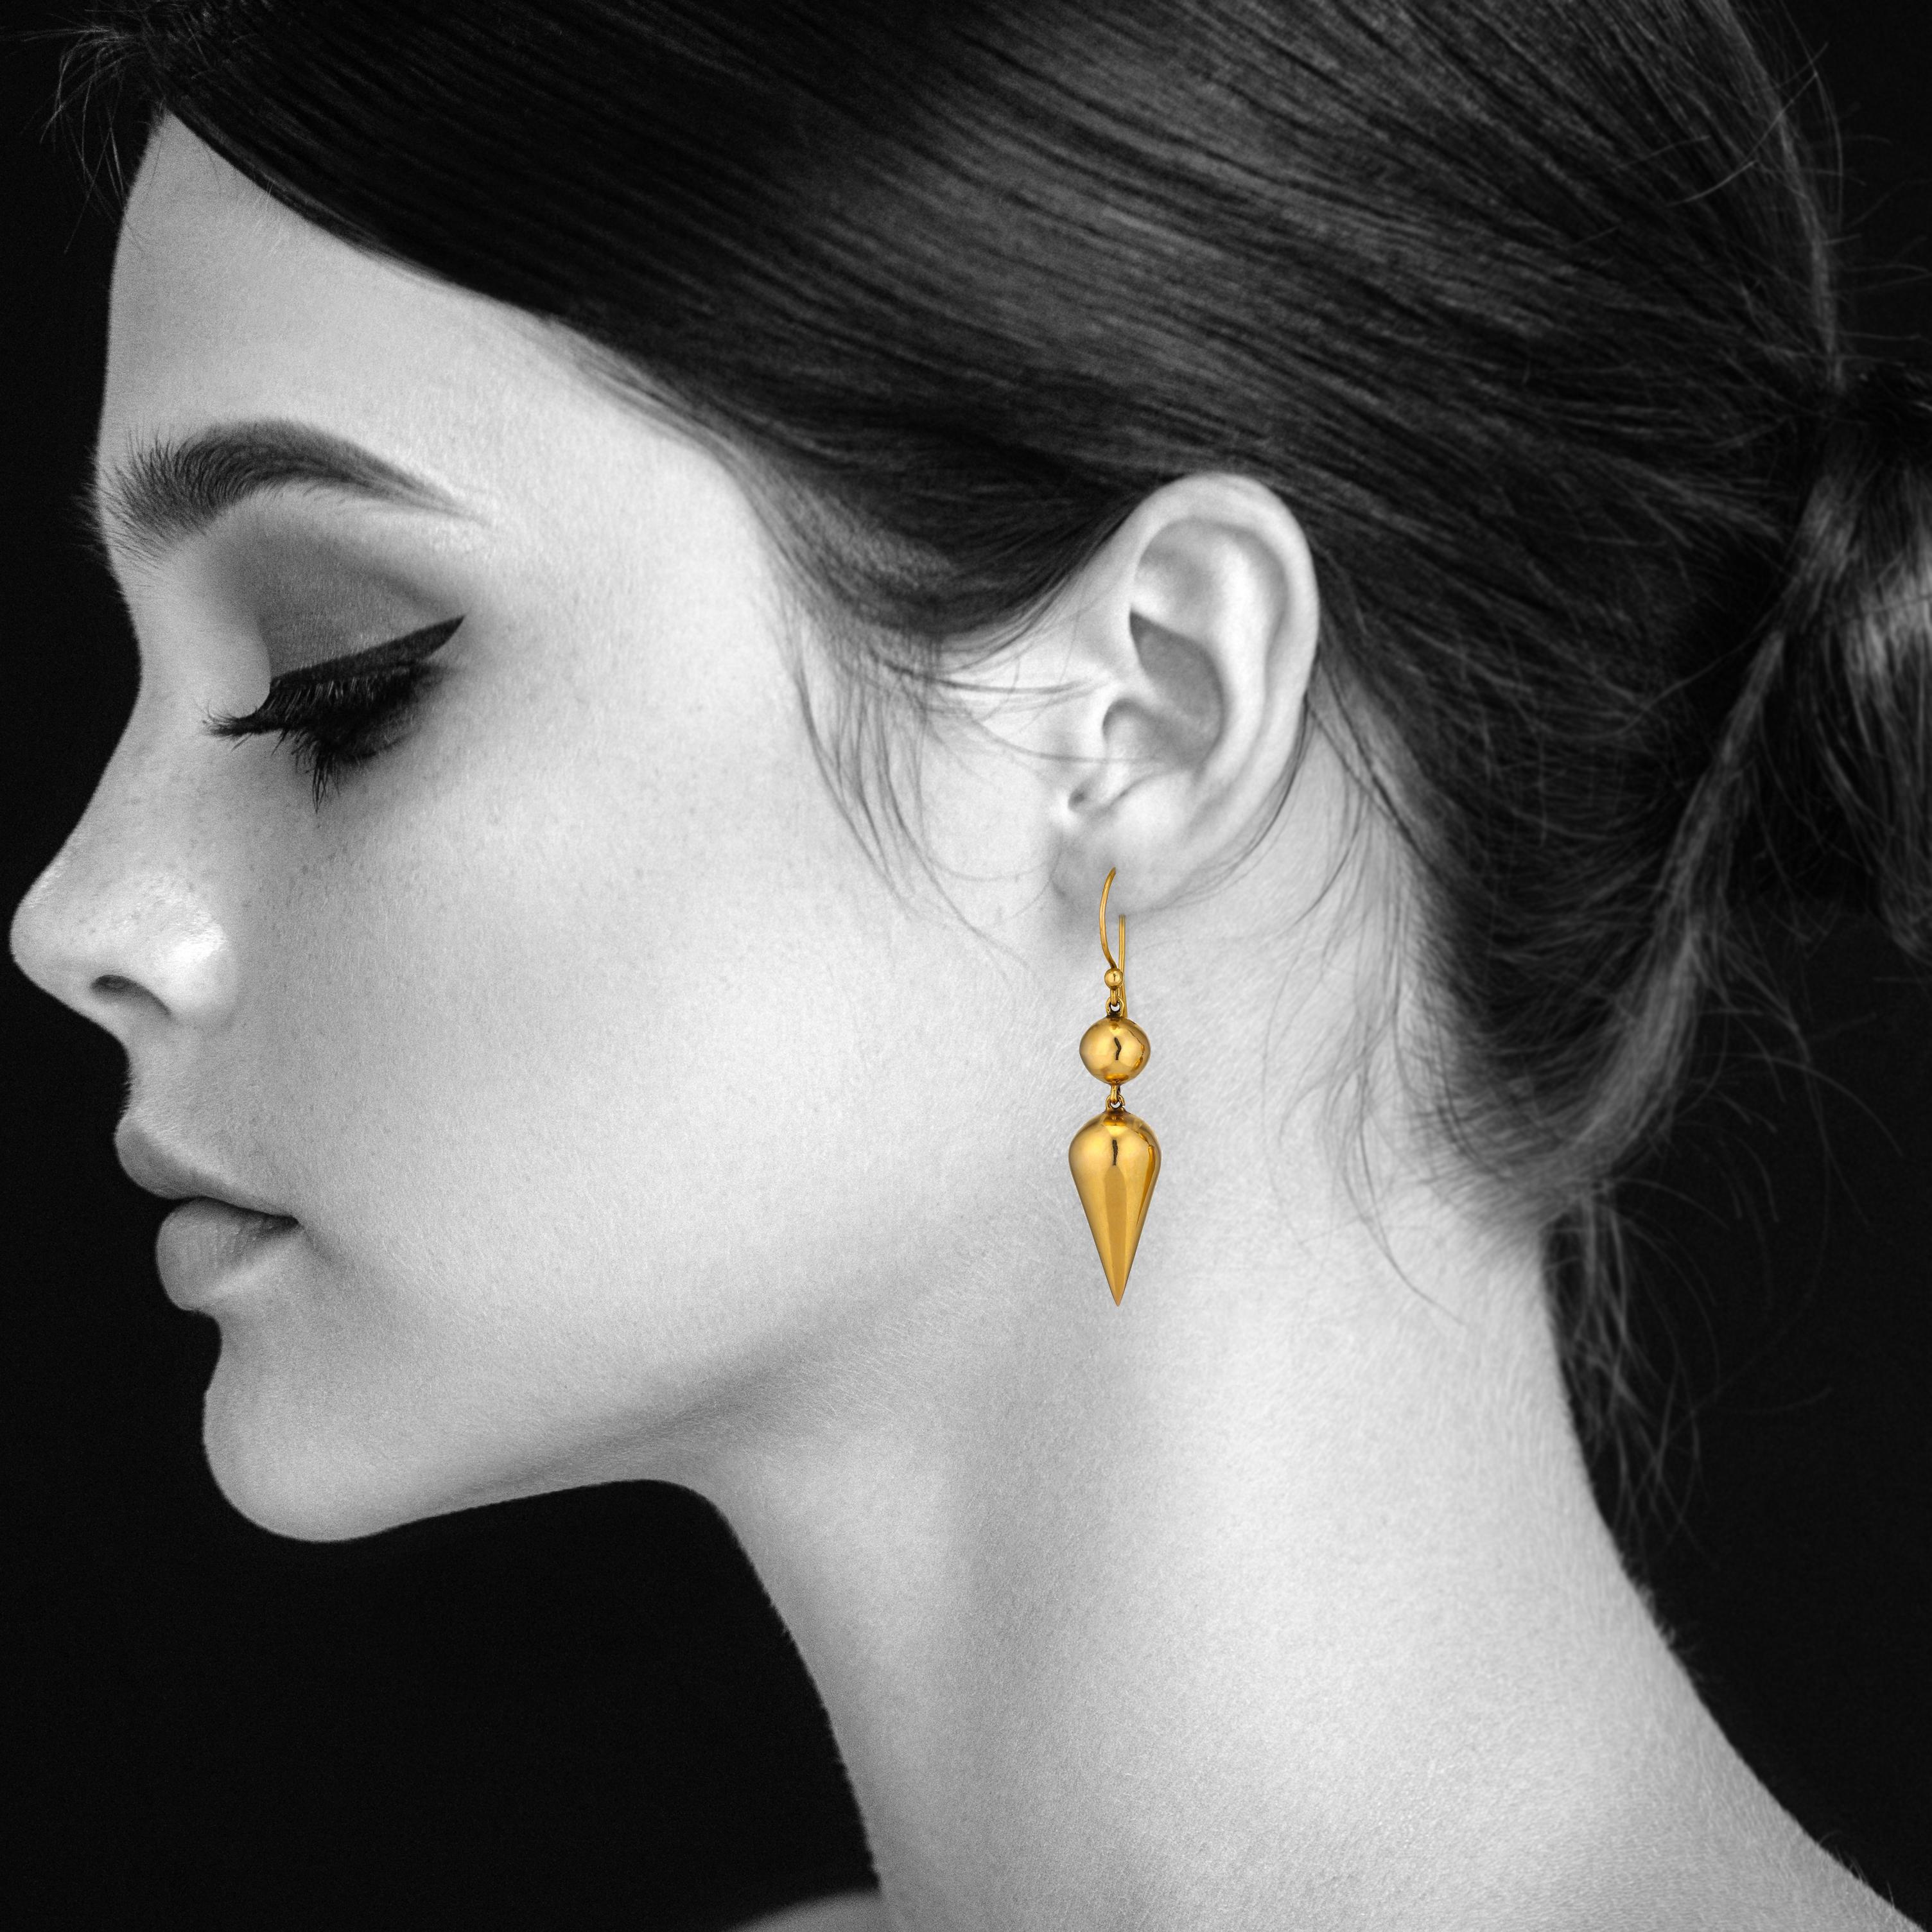 Reflecting today's modern fashion aesthetic, these Victorian handmade cone and ball earrings are stylishly current.  With a warm honeyed patina and a clean architectural silhouette, these 14 karat yellow gold earrings move and dance like they were